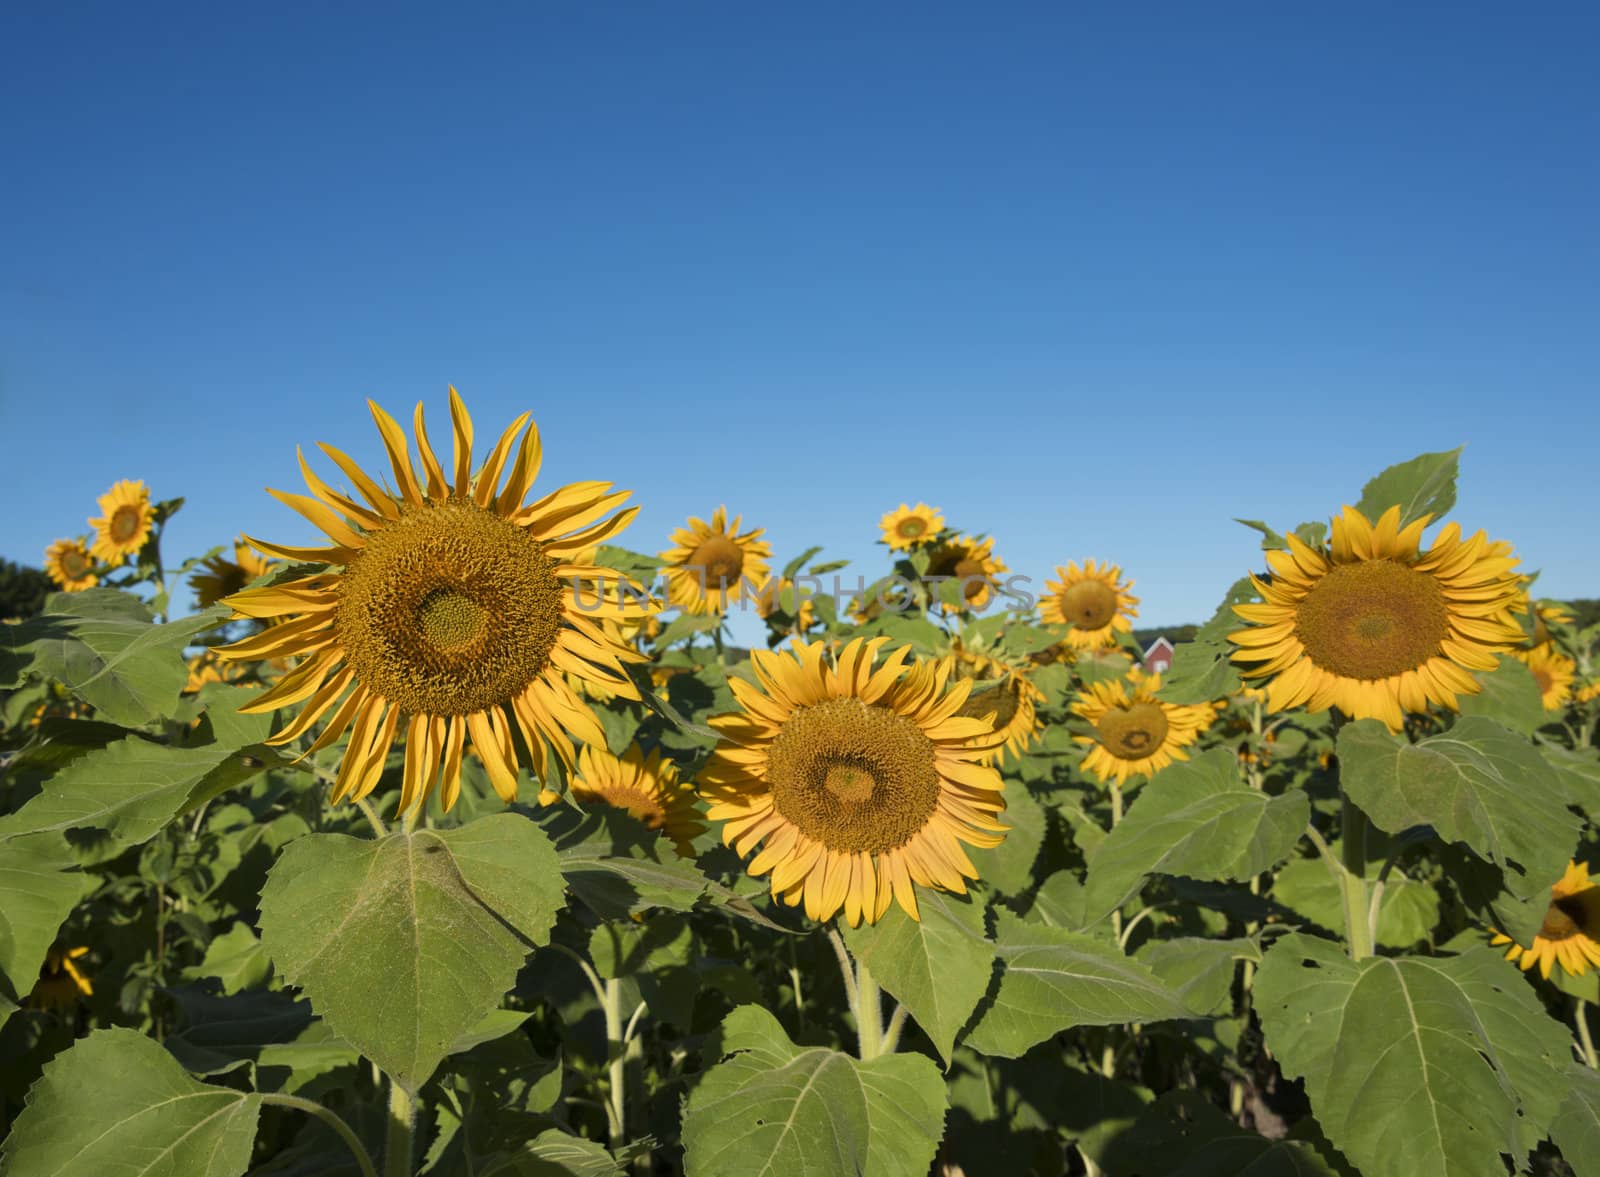 Selective focus on sunflower on the left of the foreground flowers